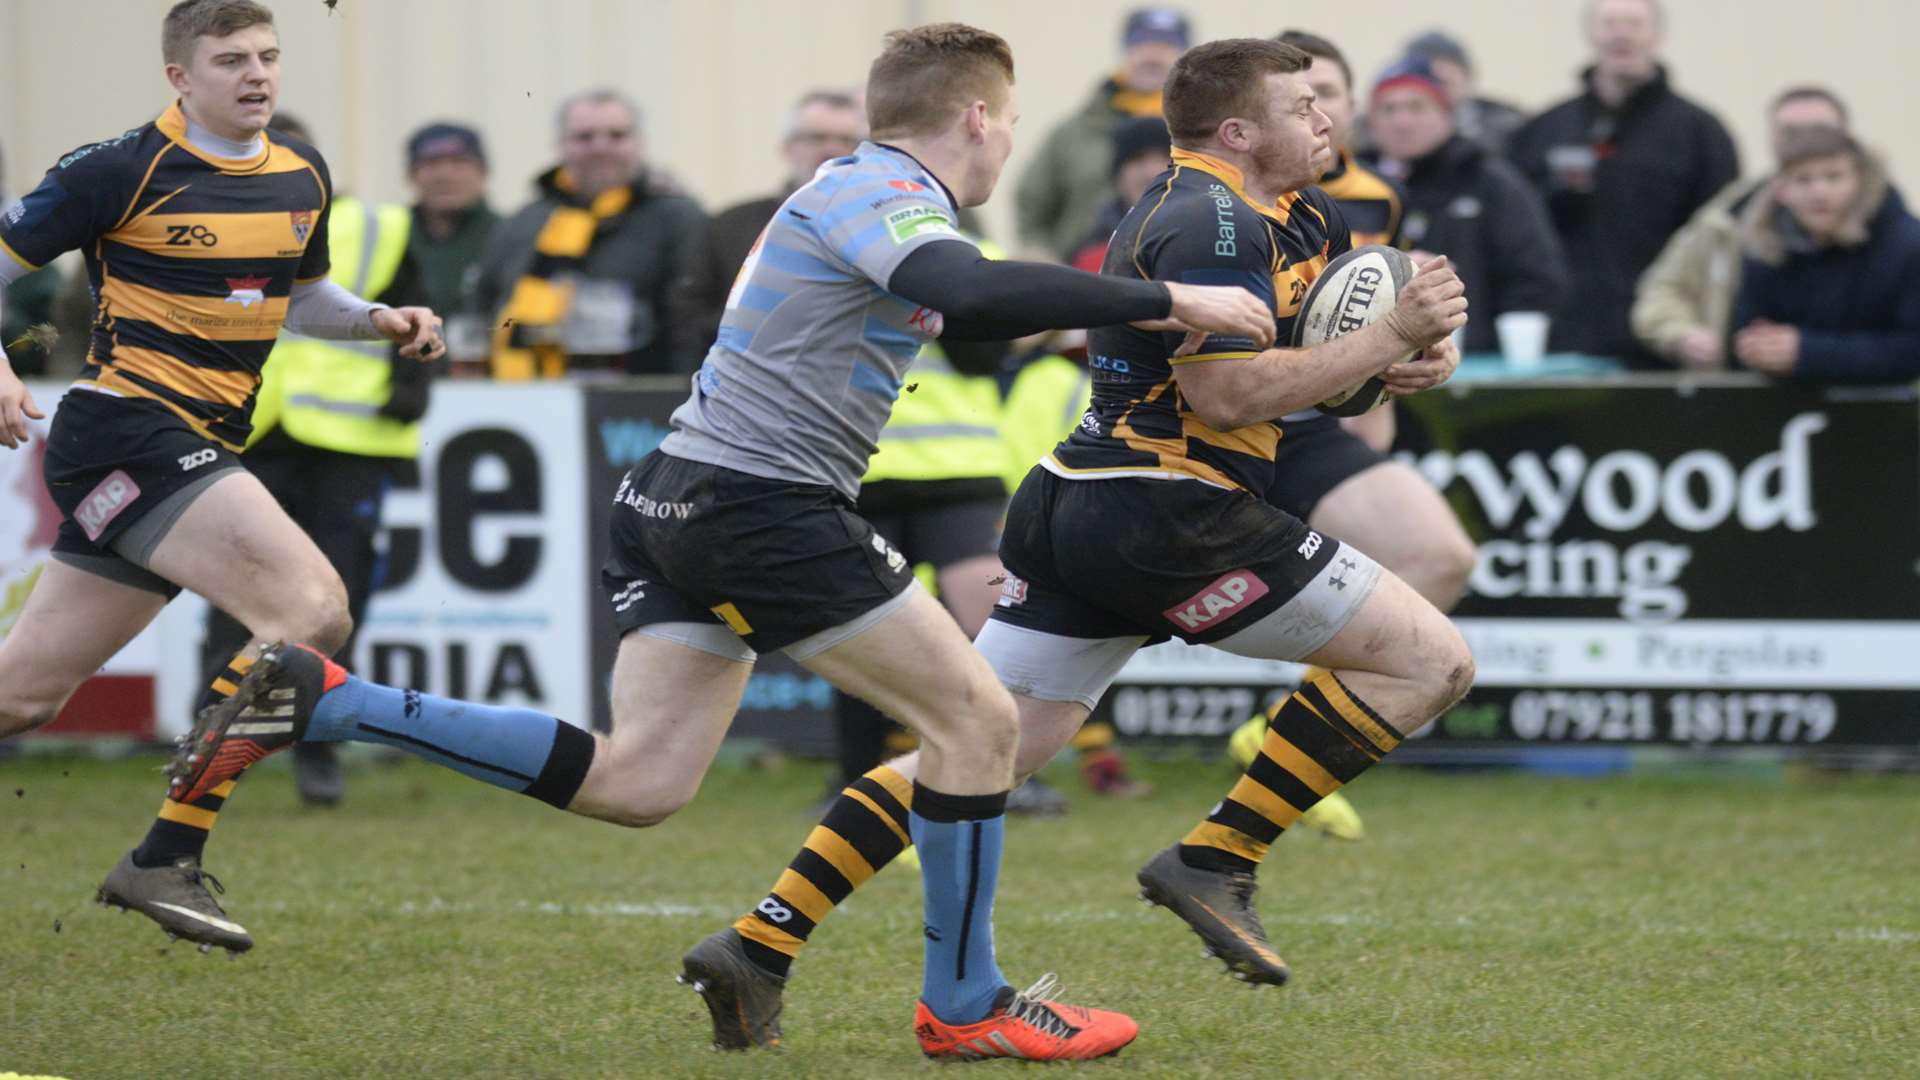 Ricky Mackintosh bursts forward against Dings. Picture: Chris Davey.